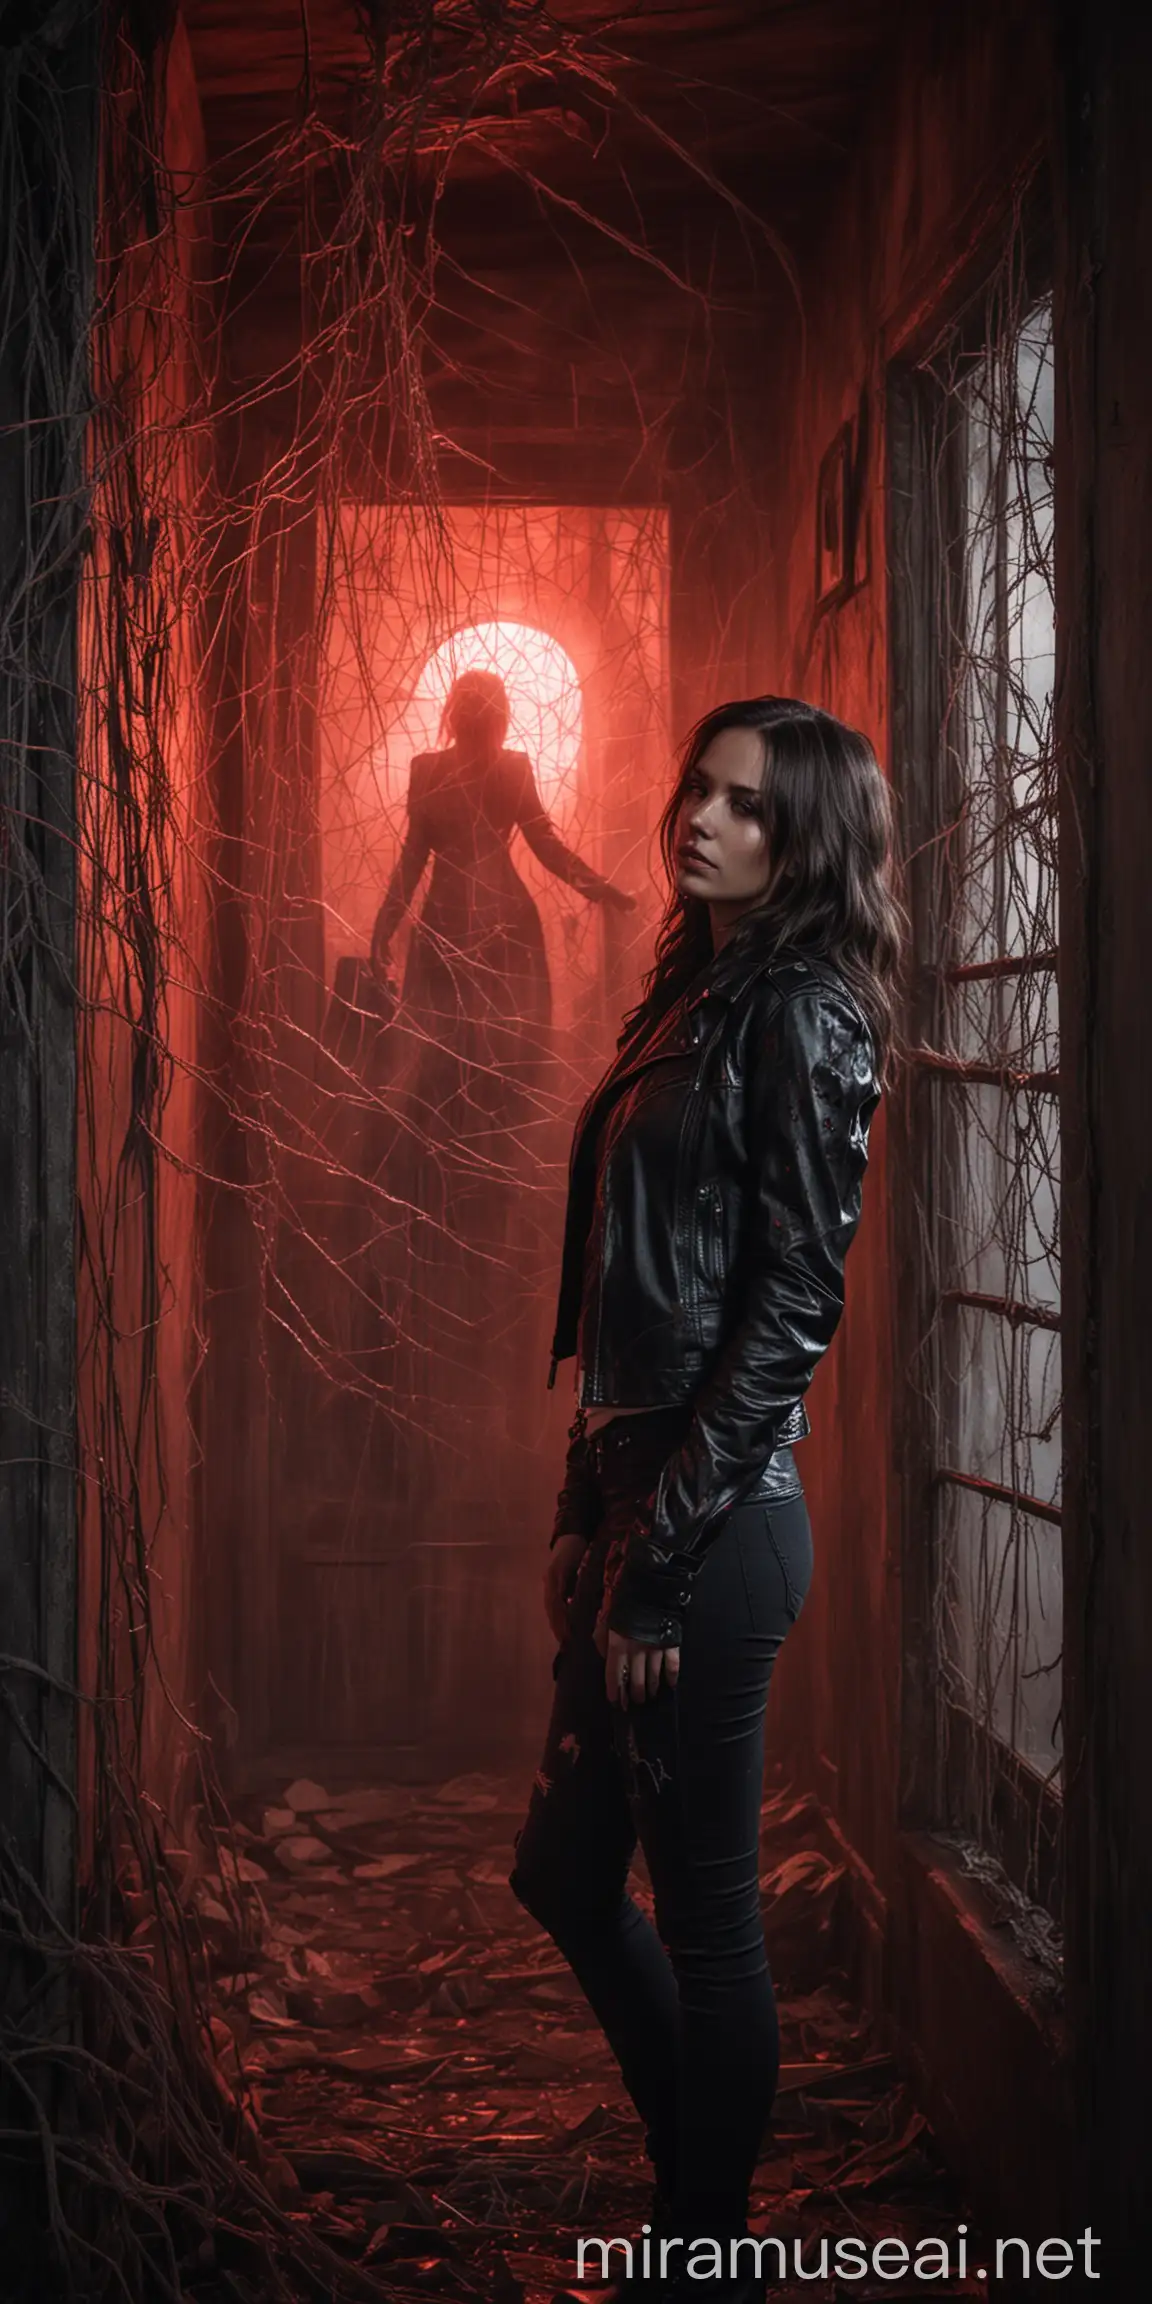 A beautiful lady in a leather jacket, looking out from a scary house with cobwebs and red luminous light behind, with a strange shadow hand above